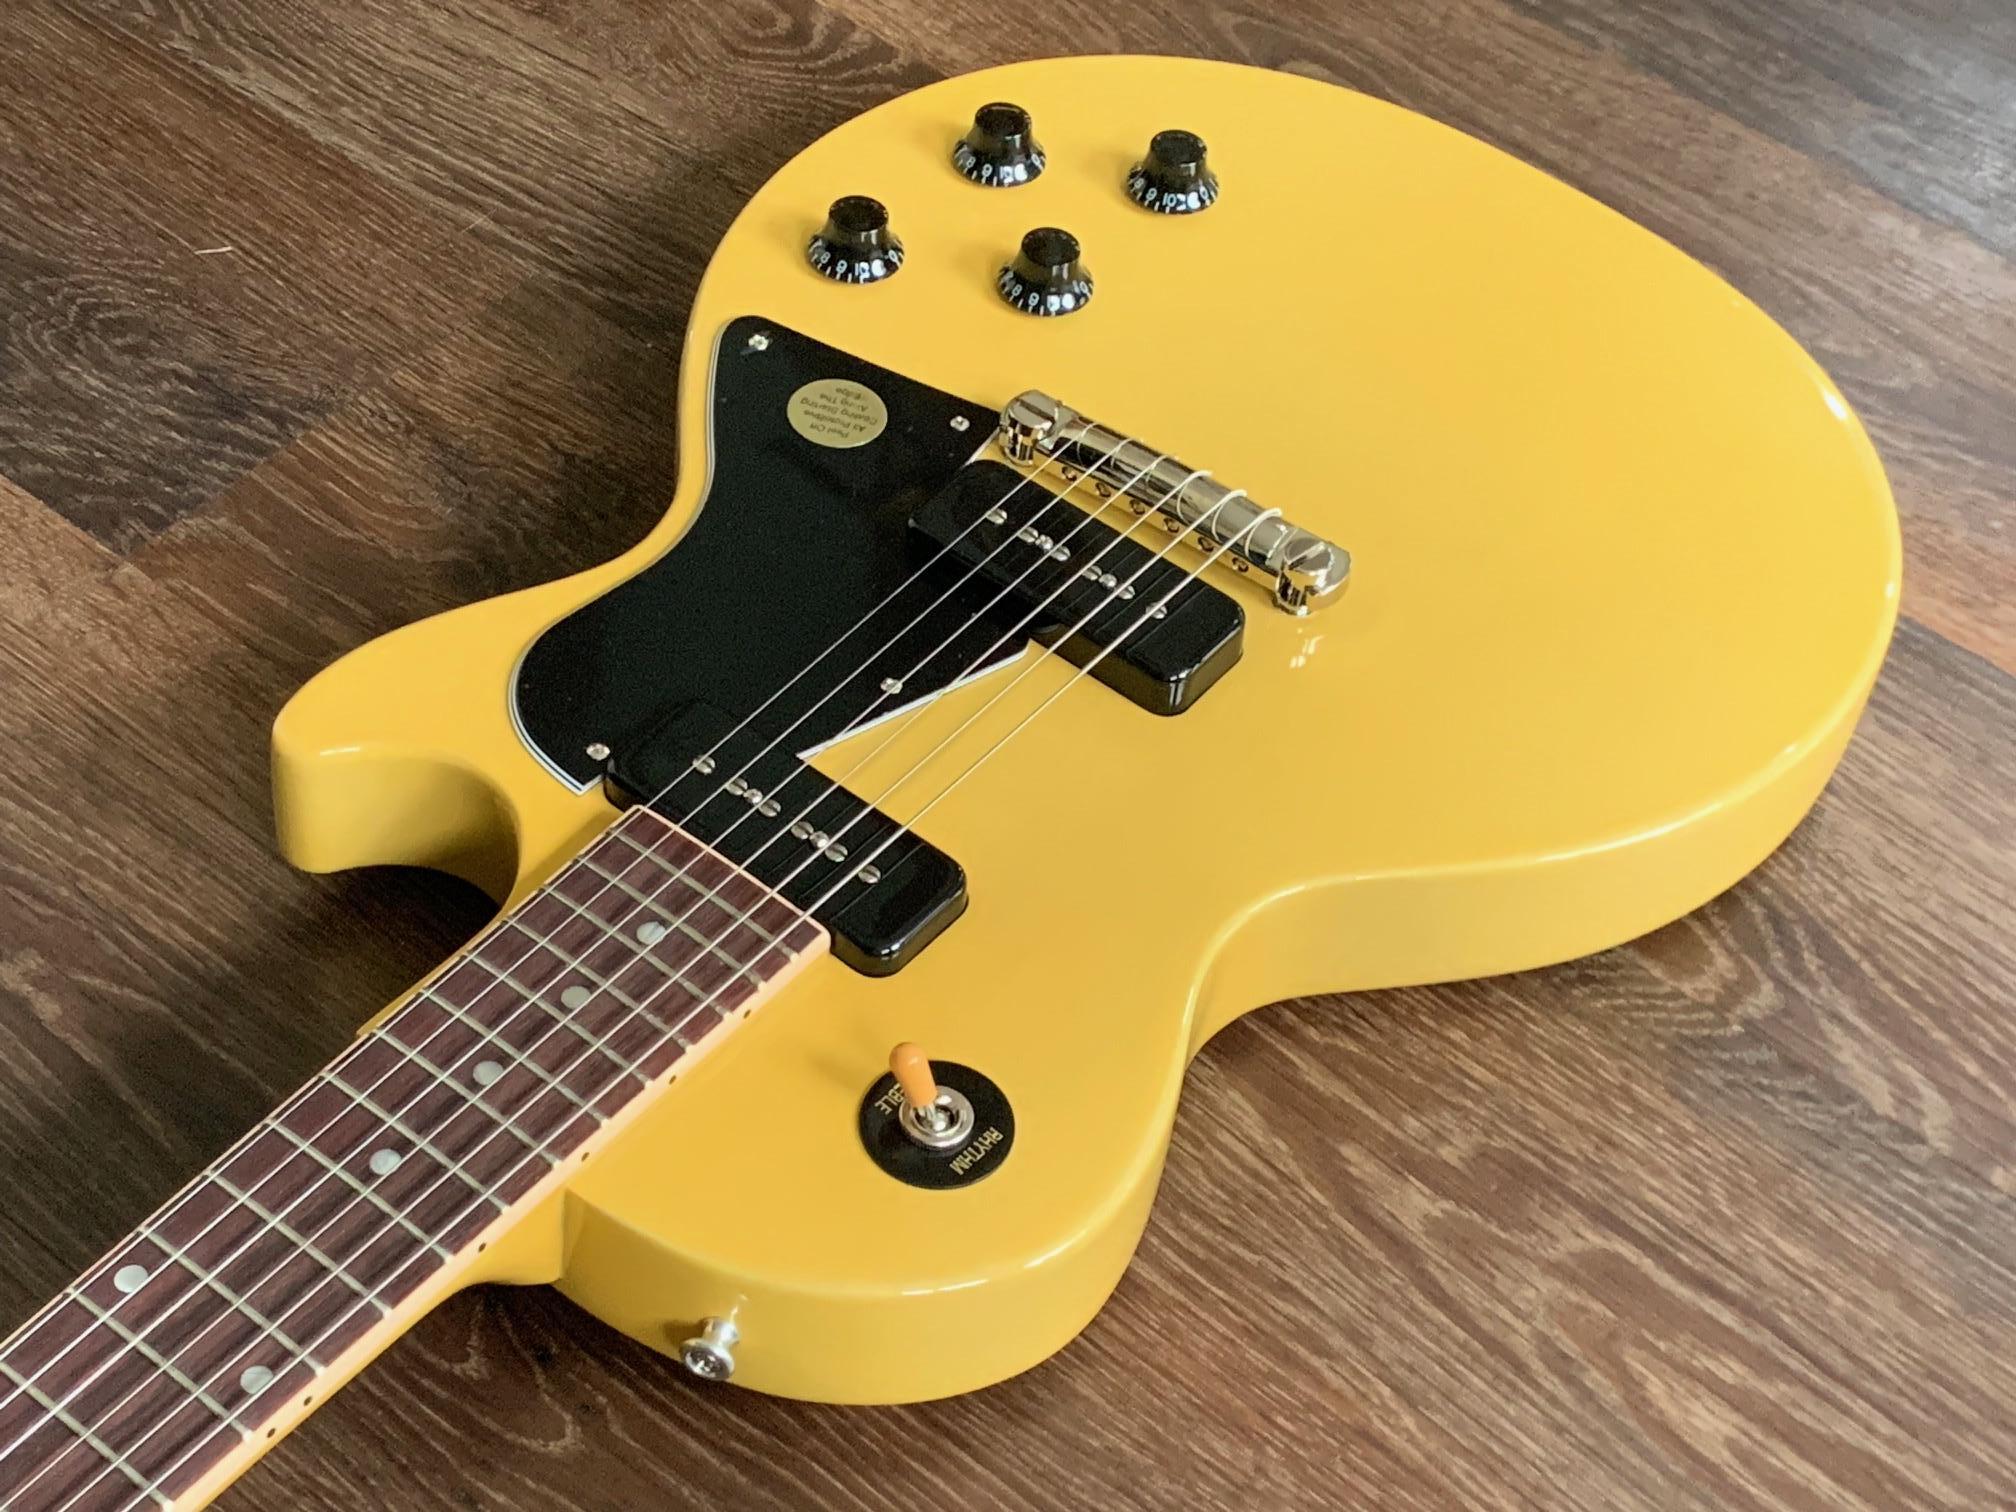 Gibson Les Paul Special 2019 Tv Yellow Guitar For Sale Richard Henry